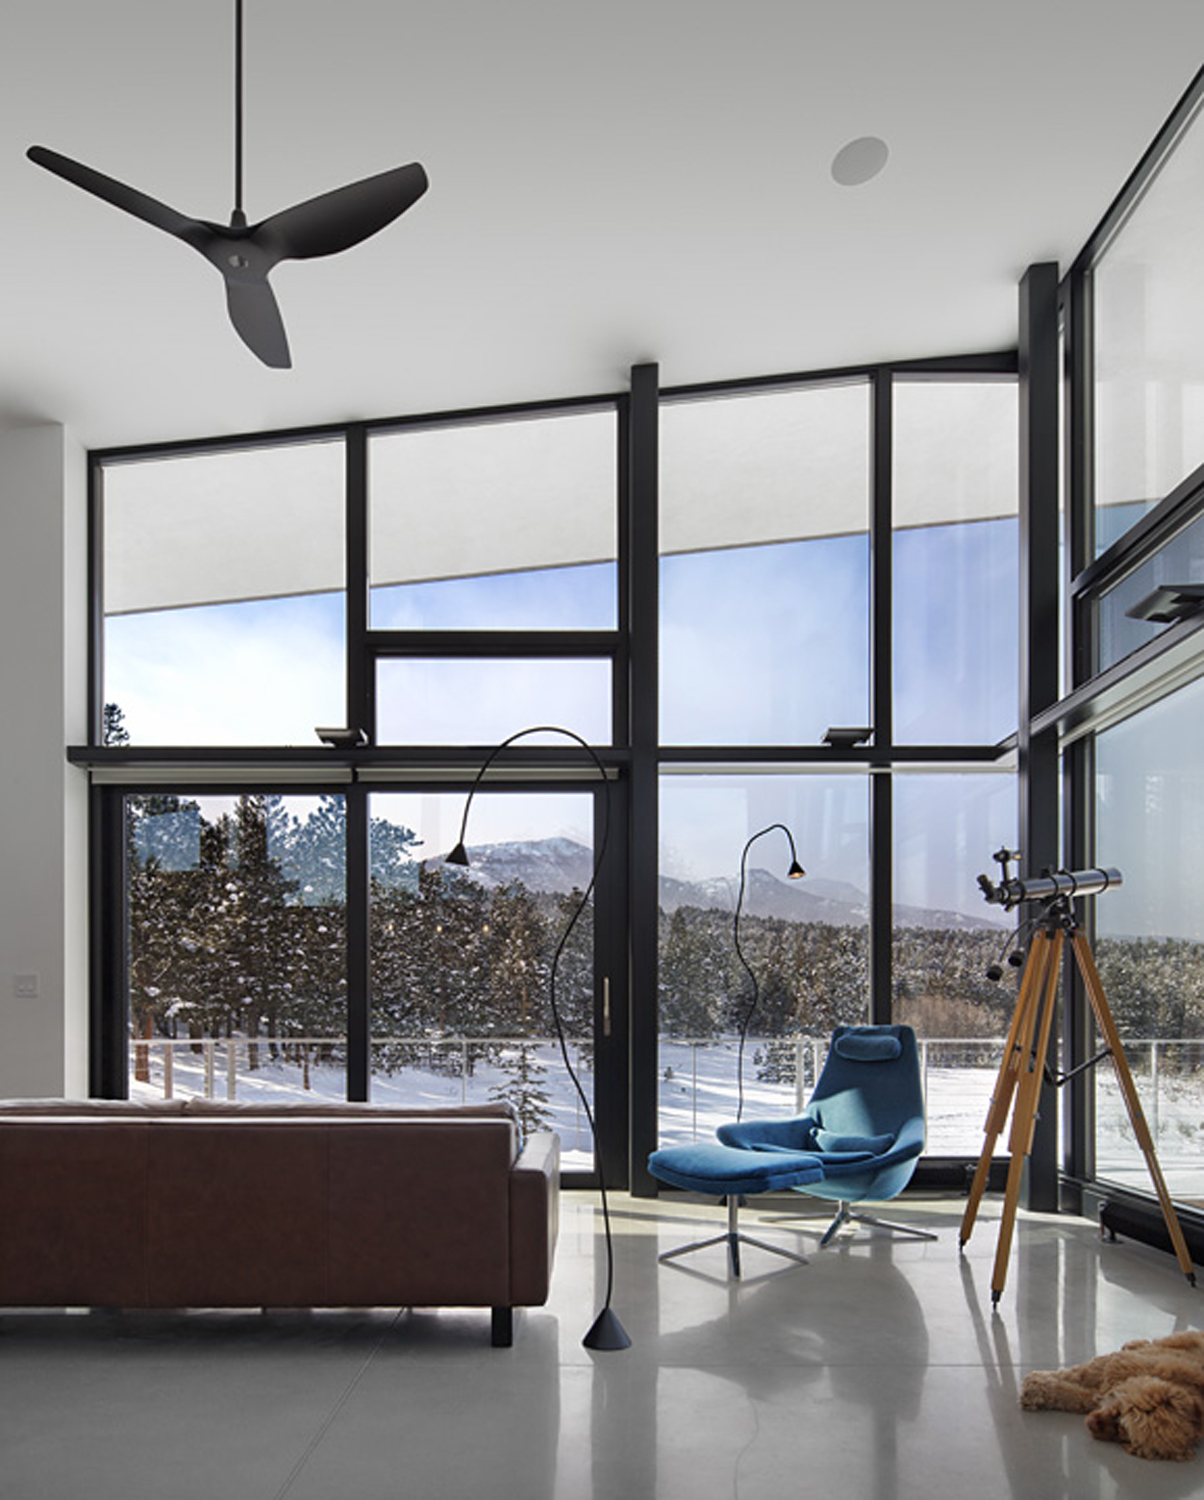 Cool interior colors allow panoramic views to take center stage. Arch11 designed the glass to withstand 140 mph winds, frame views and provide excellent energy performance (photo by Raul Garcia).